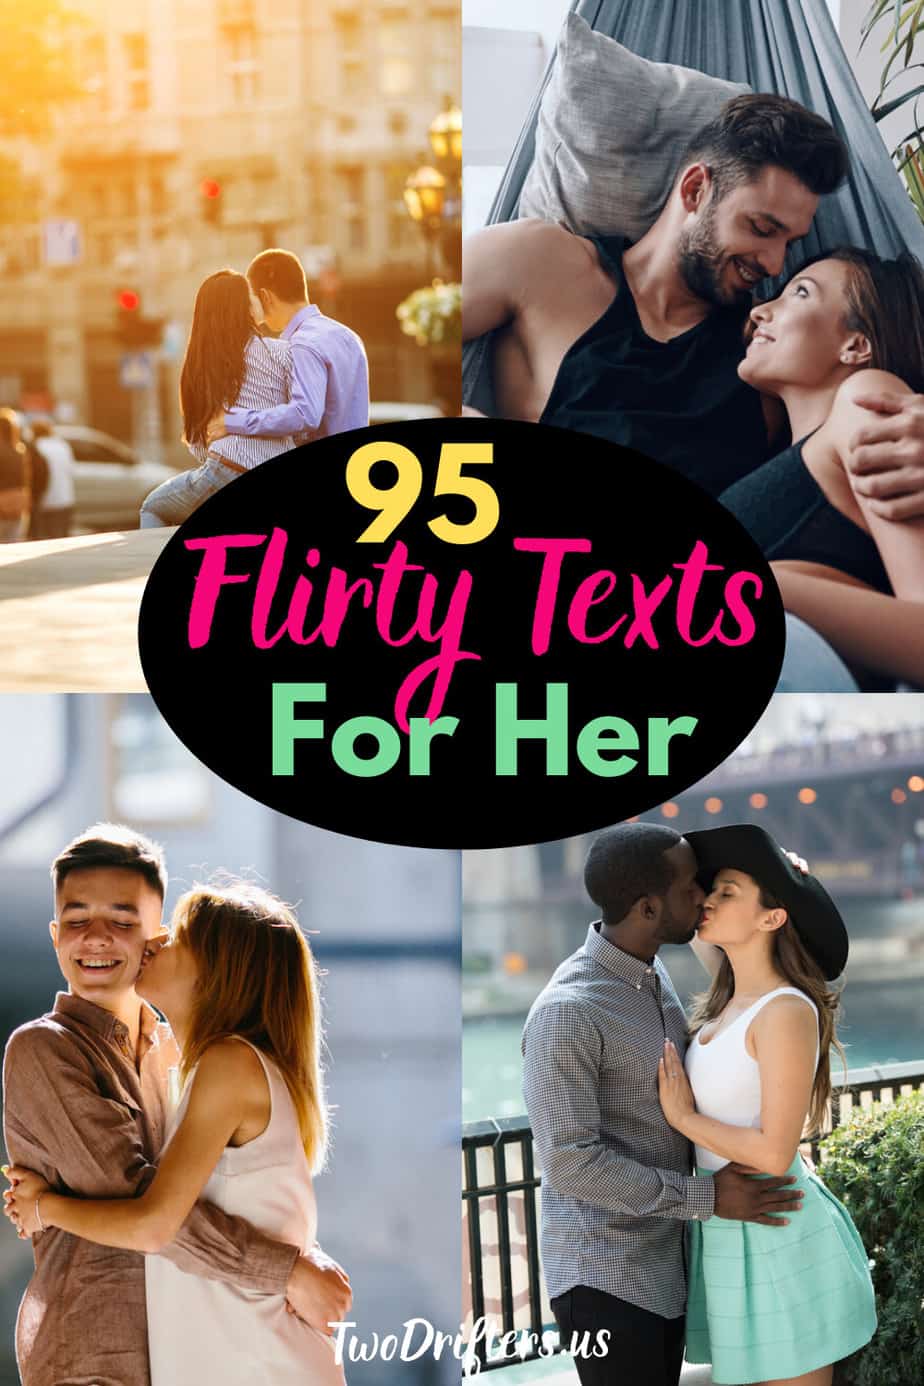 95 Flirty Texts for Her: Sweet Messages to Make Her Swoon